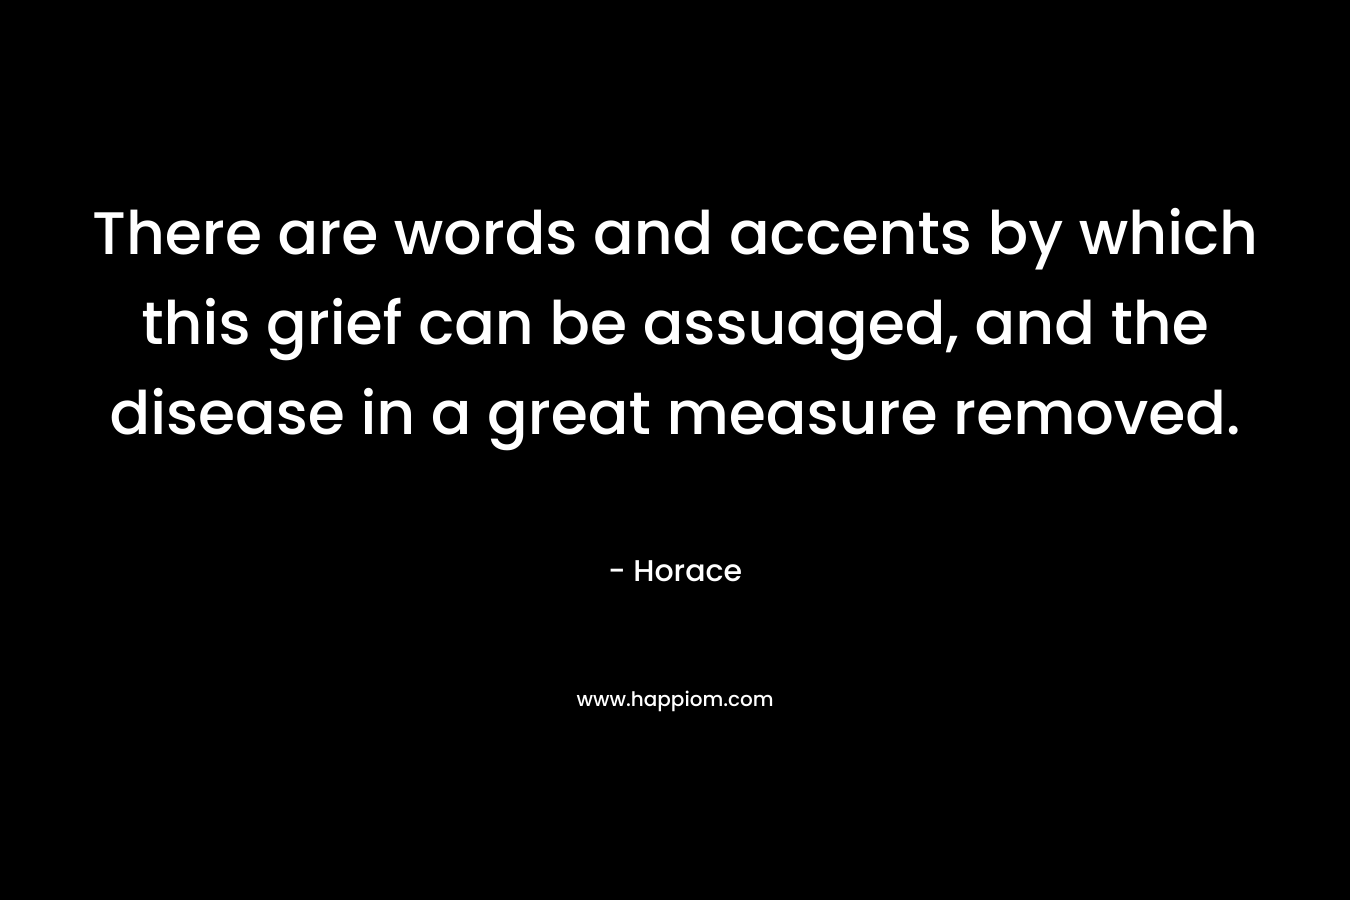 There are words and accents by which this grief can be assuaged, and the disease in a great measure removed. – Horace